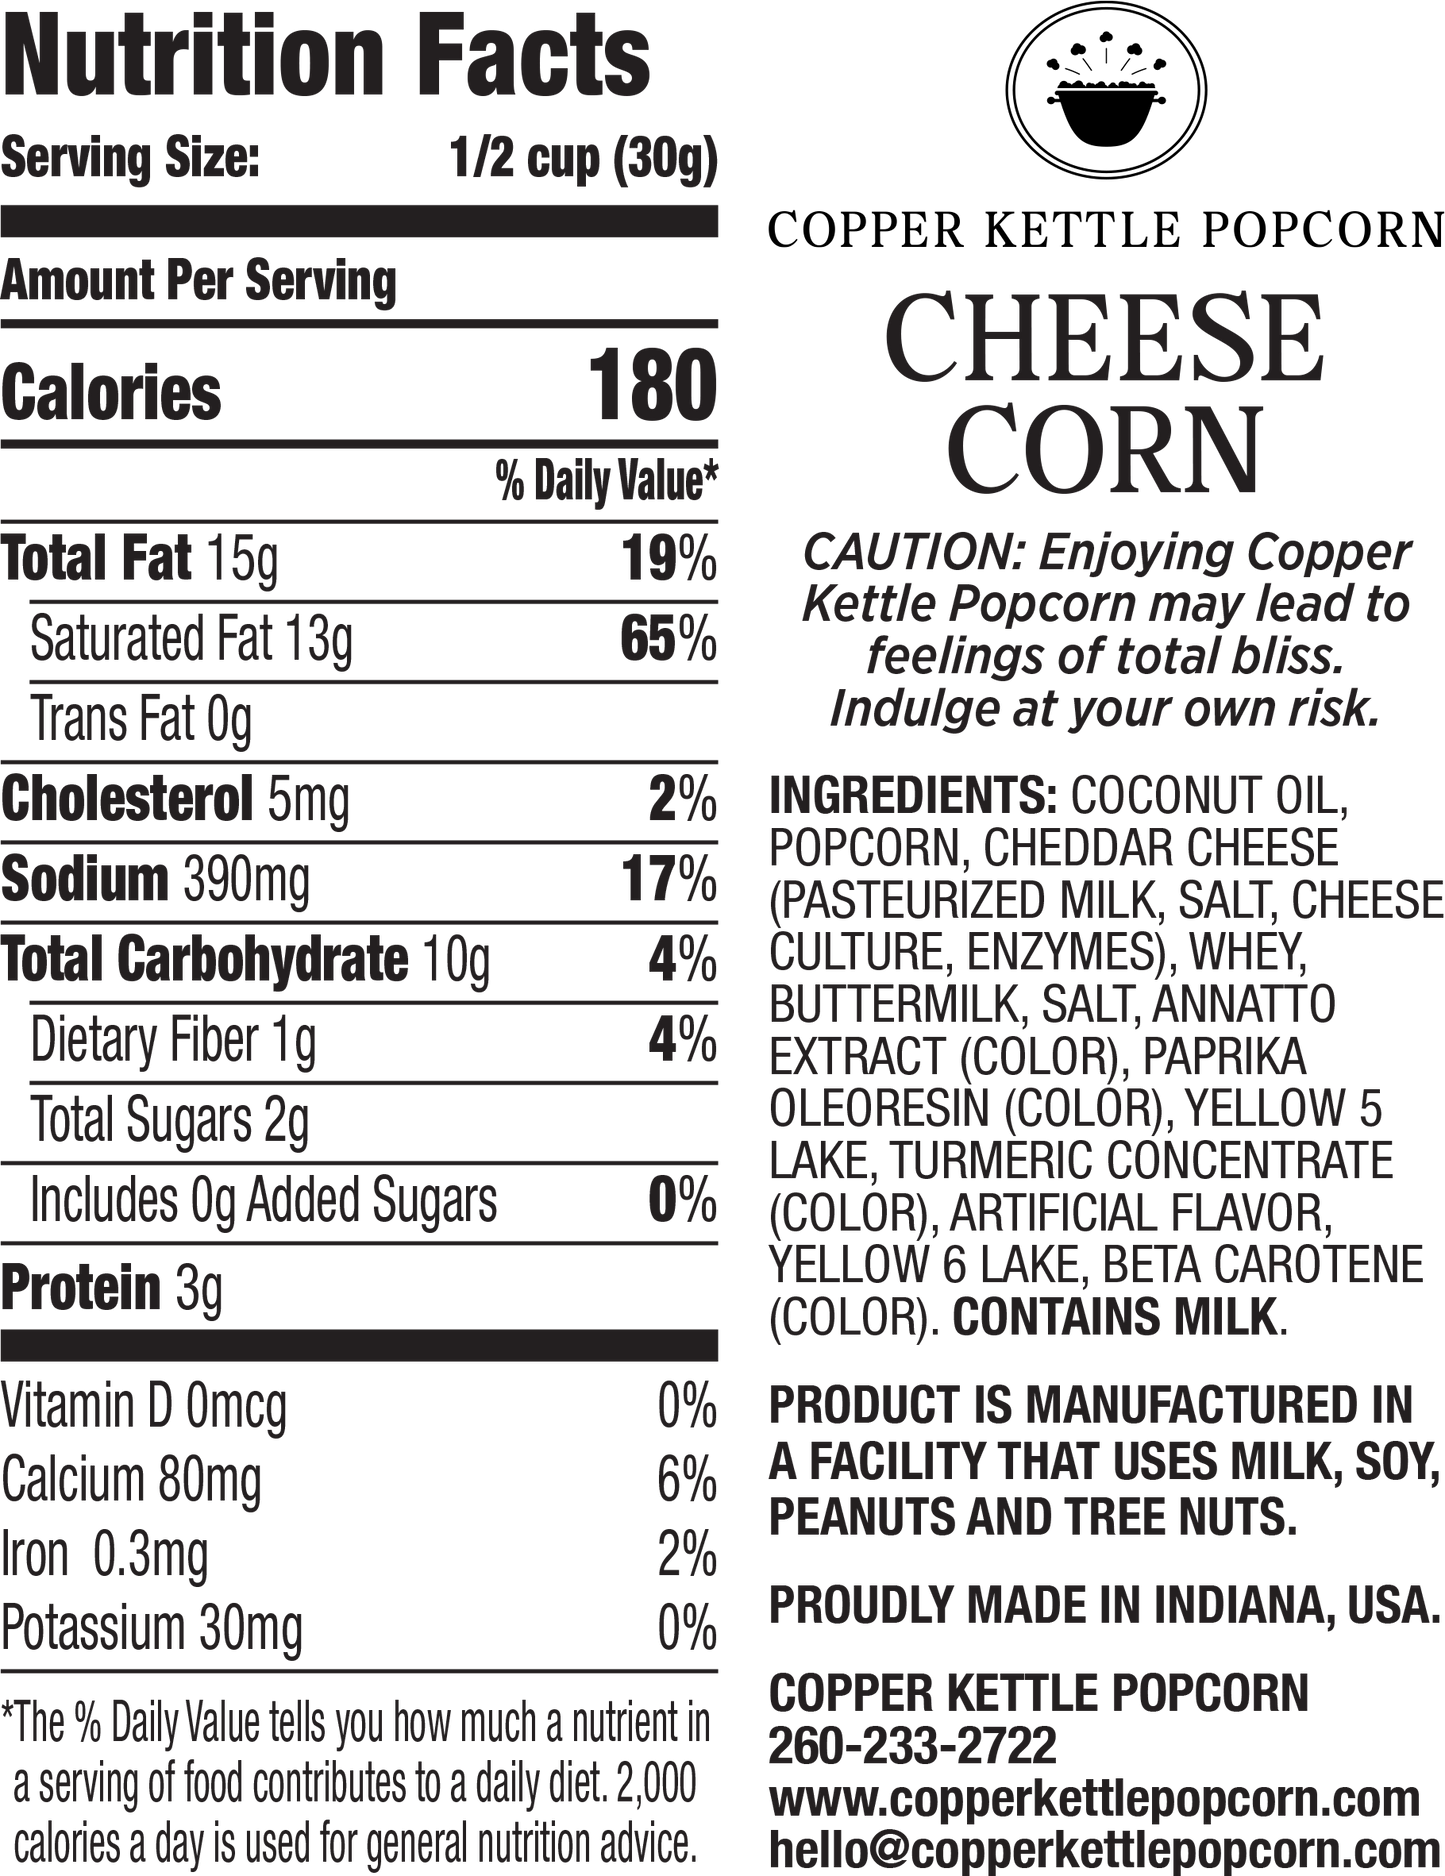 Cheese Popcorn Tub 22 Servings Nutrition Label